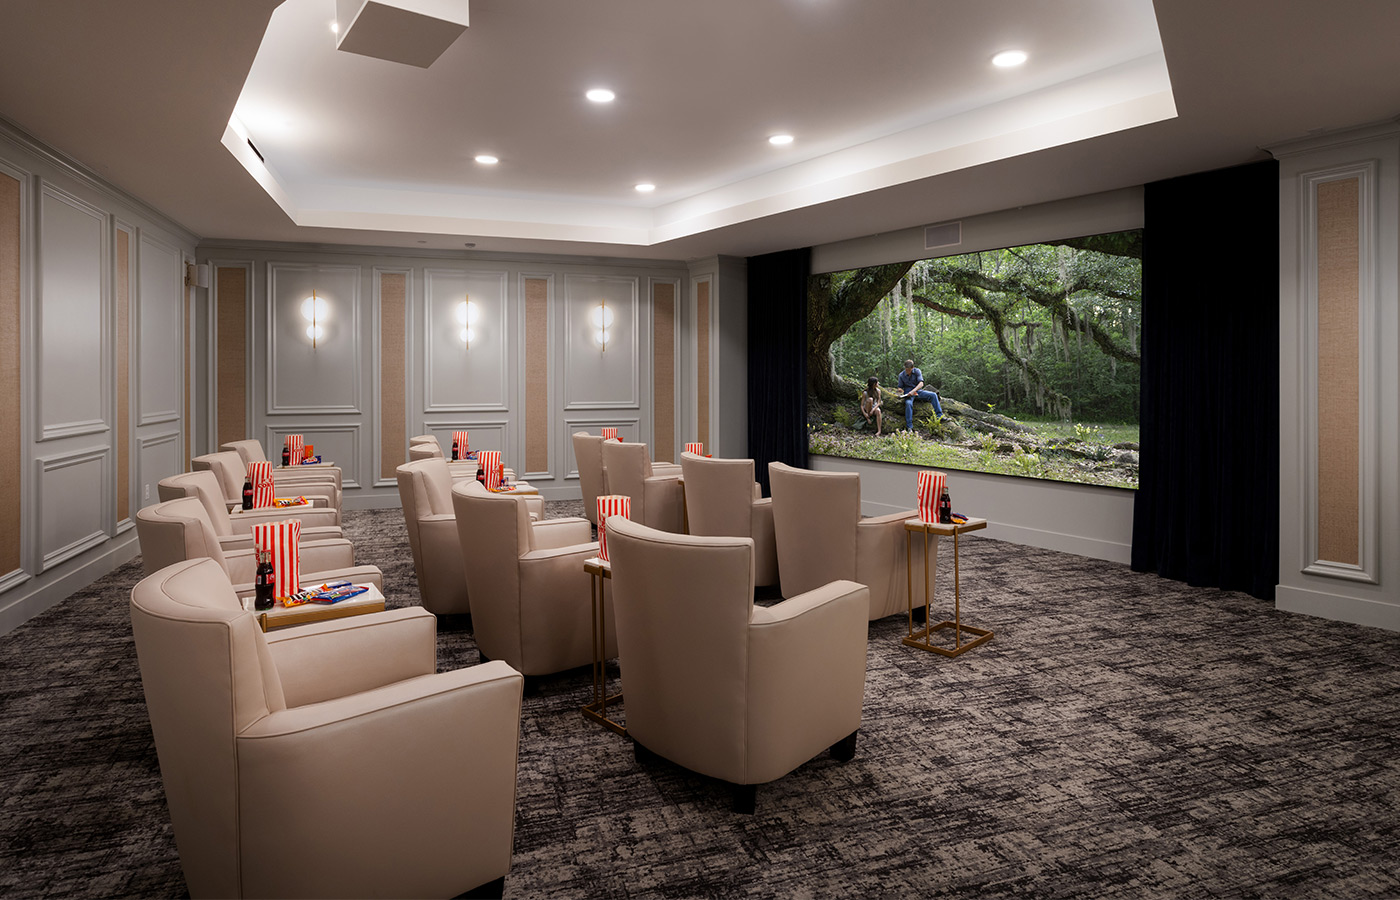 A theater room with comfy seating and a large screen.